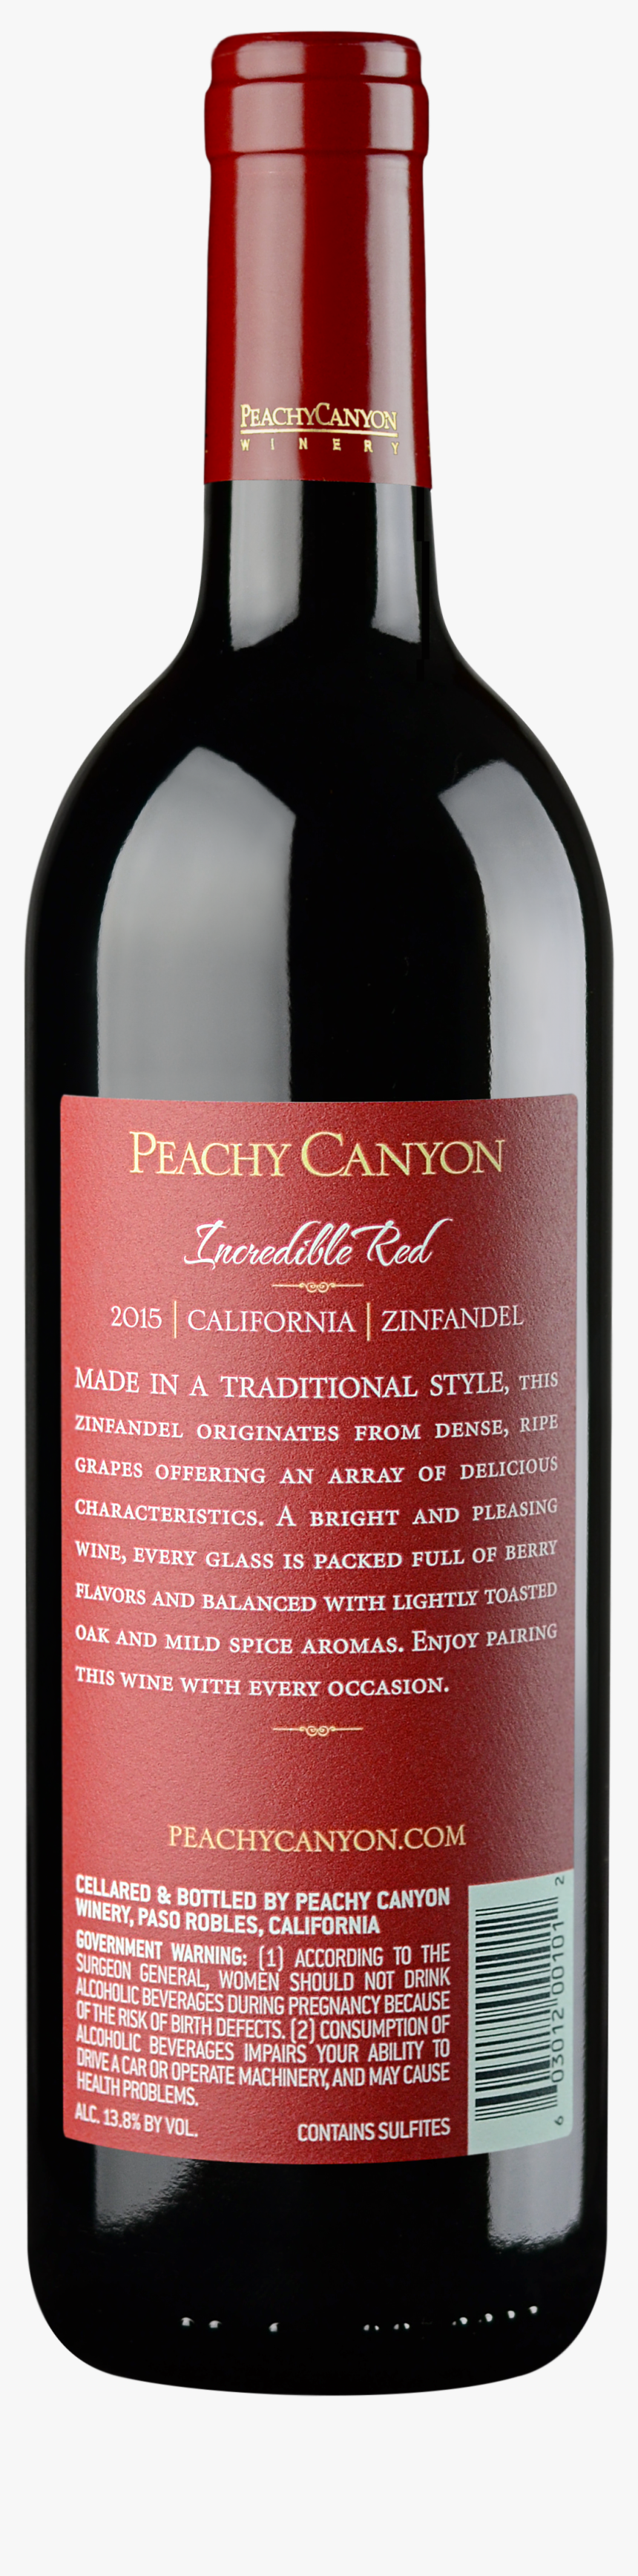 Bottle,wine Bottle,wine,glass Beverage,label,red Wine,dessert - Peachy Canyon Incredible Red Zinfandel 2015, HD Png Download, Free Download